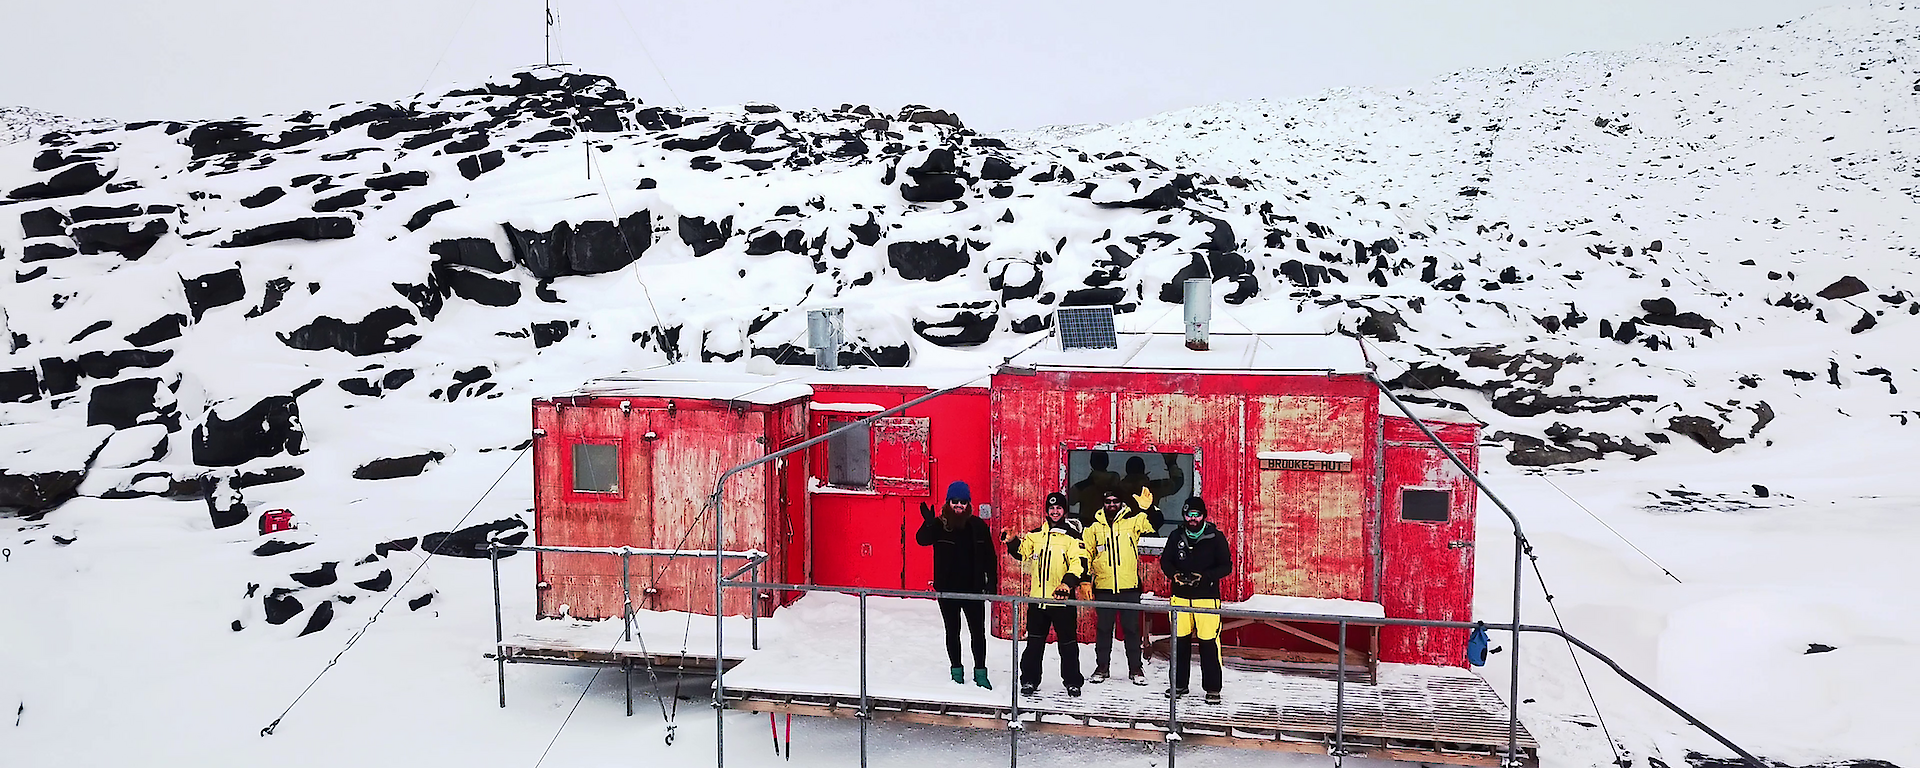 Aerial shot of four expeditioners standing on the veranda of a red hut waving to camera.  Surrounding landscape is snowy